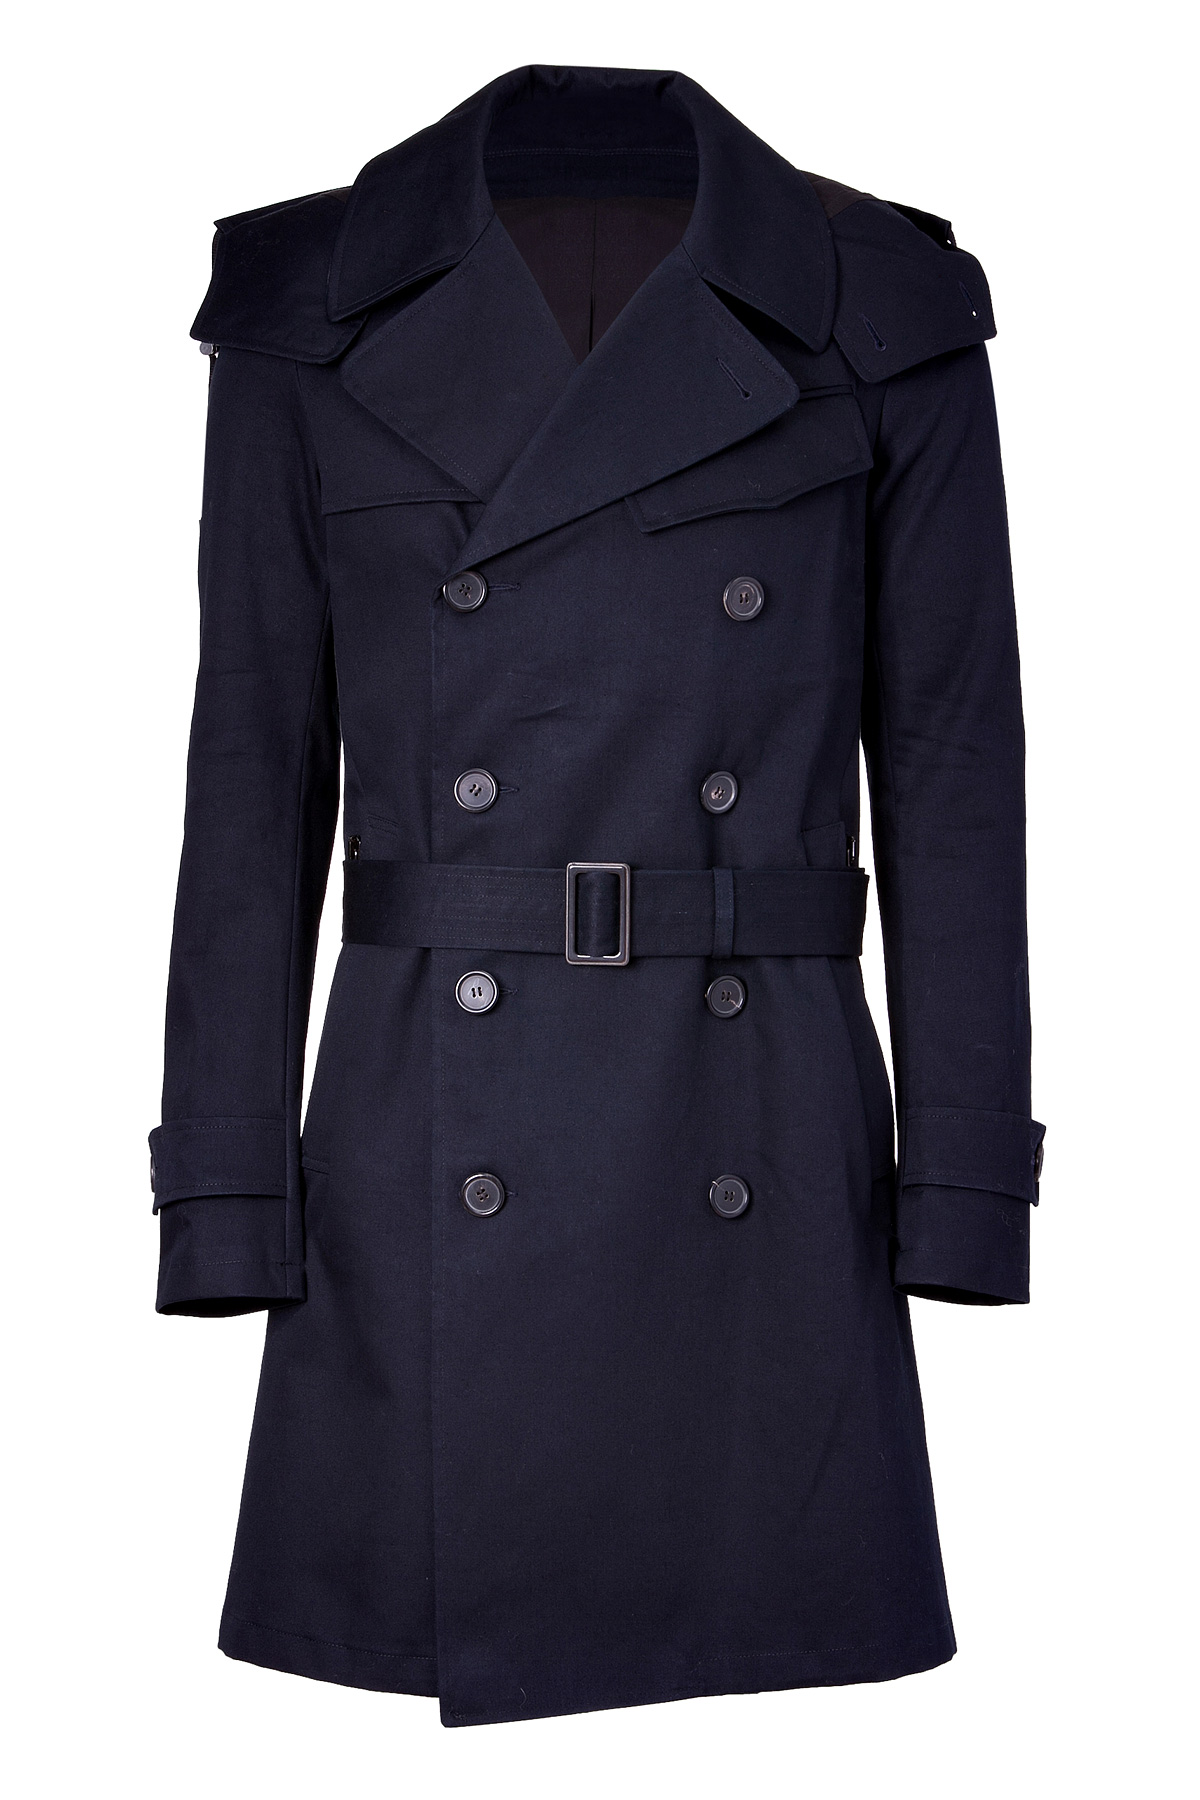 Balmain Navy Doublebreasted Cotton Trench Coat in Blue for Men (navy ...